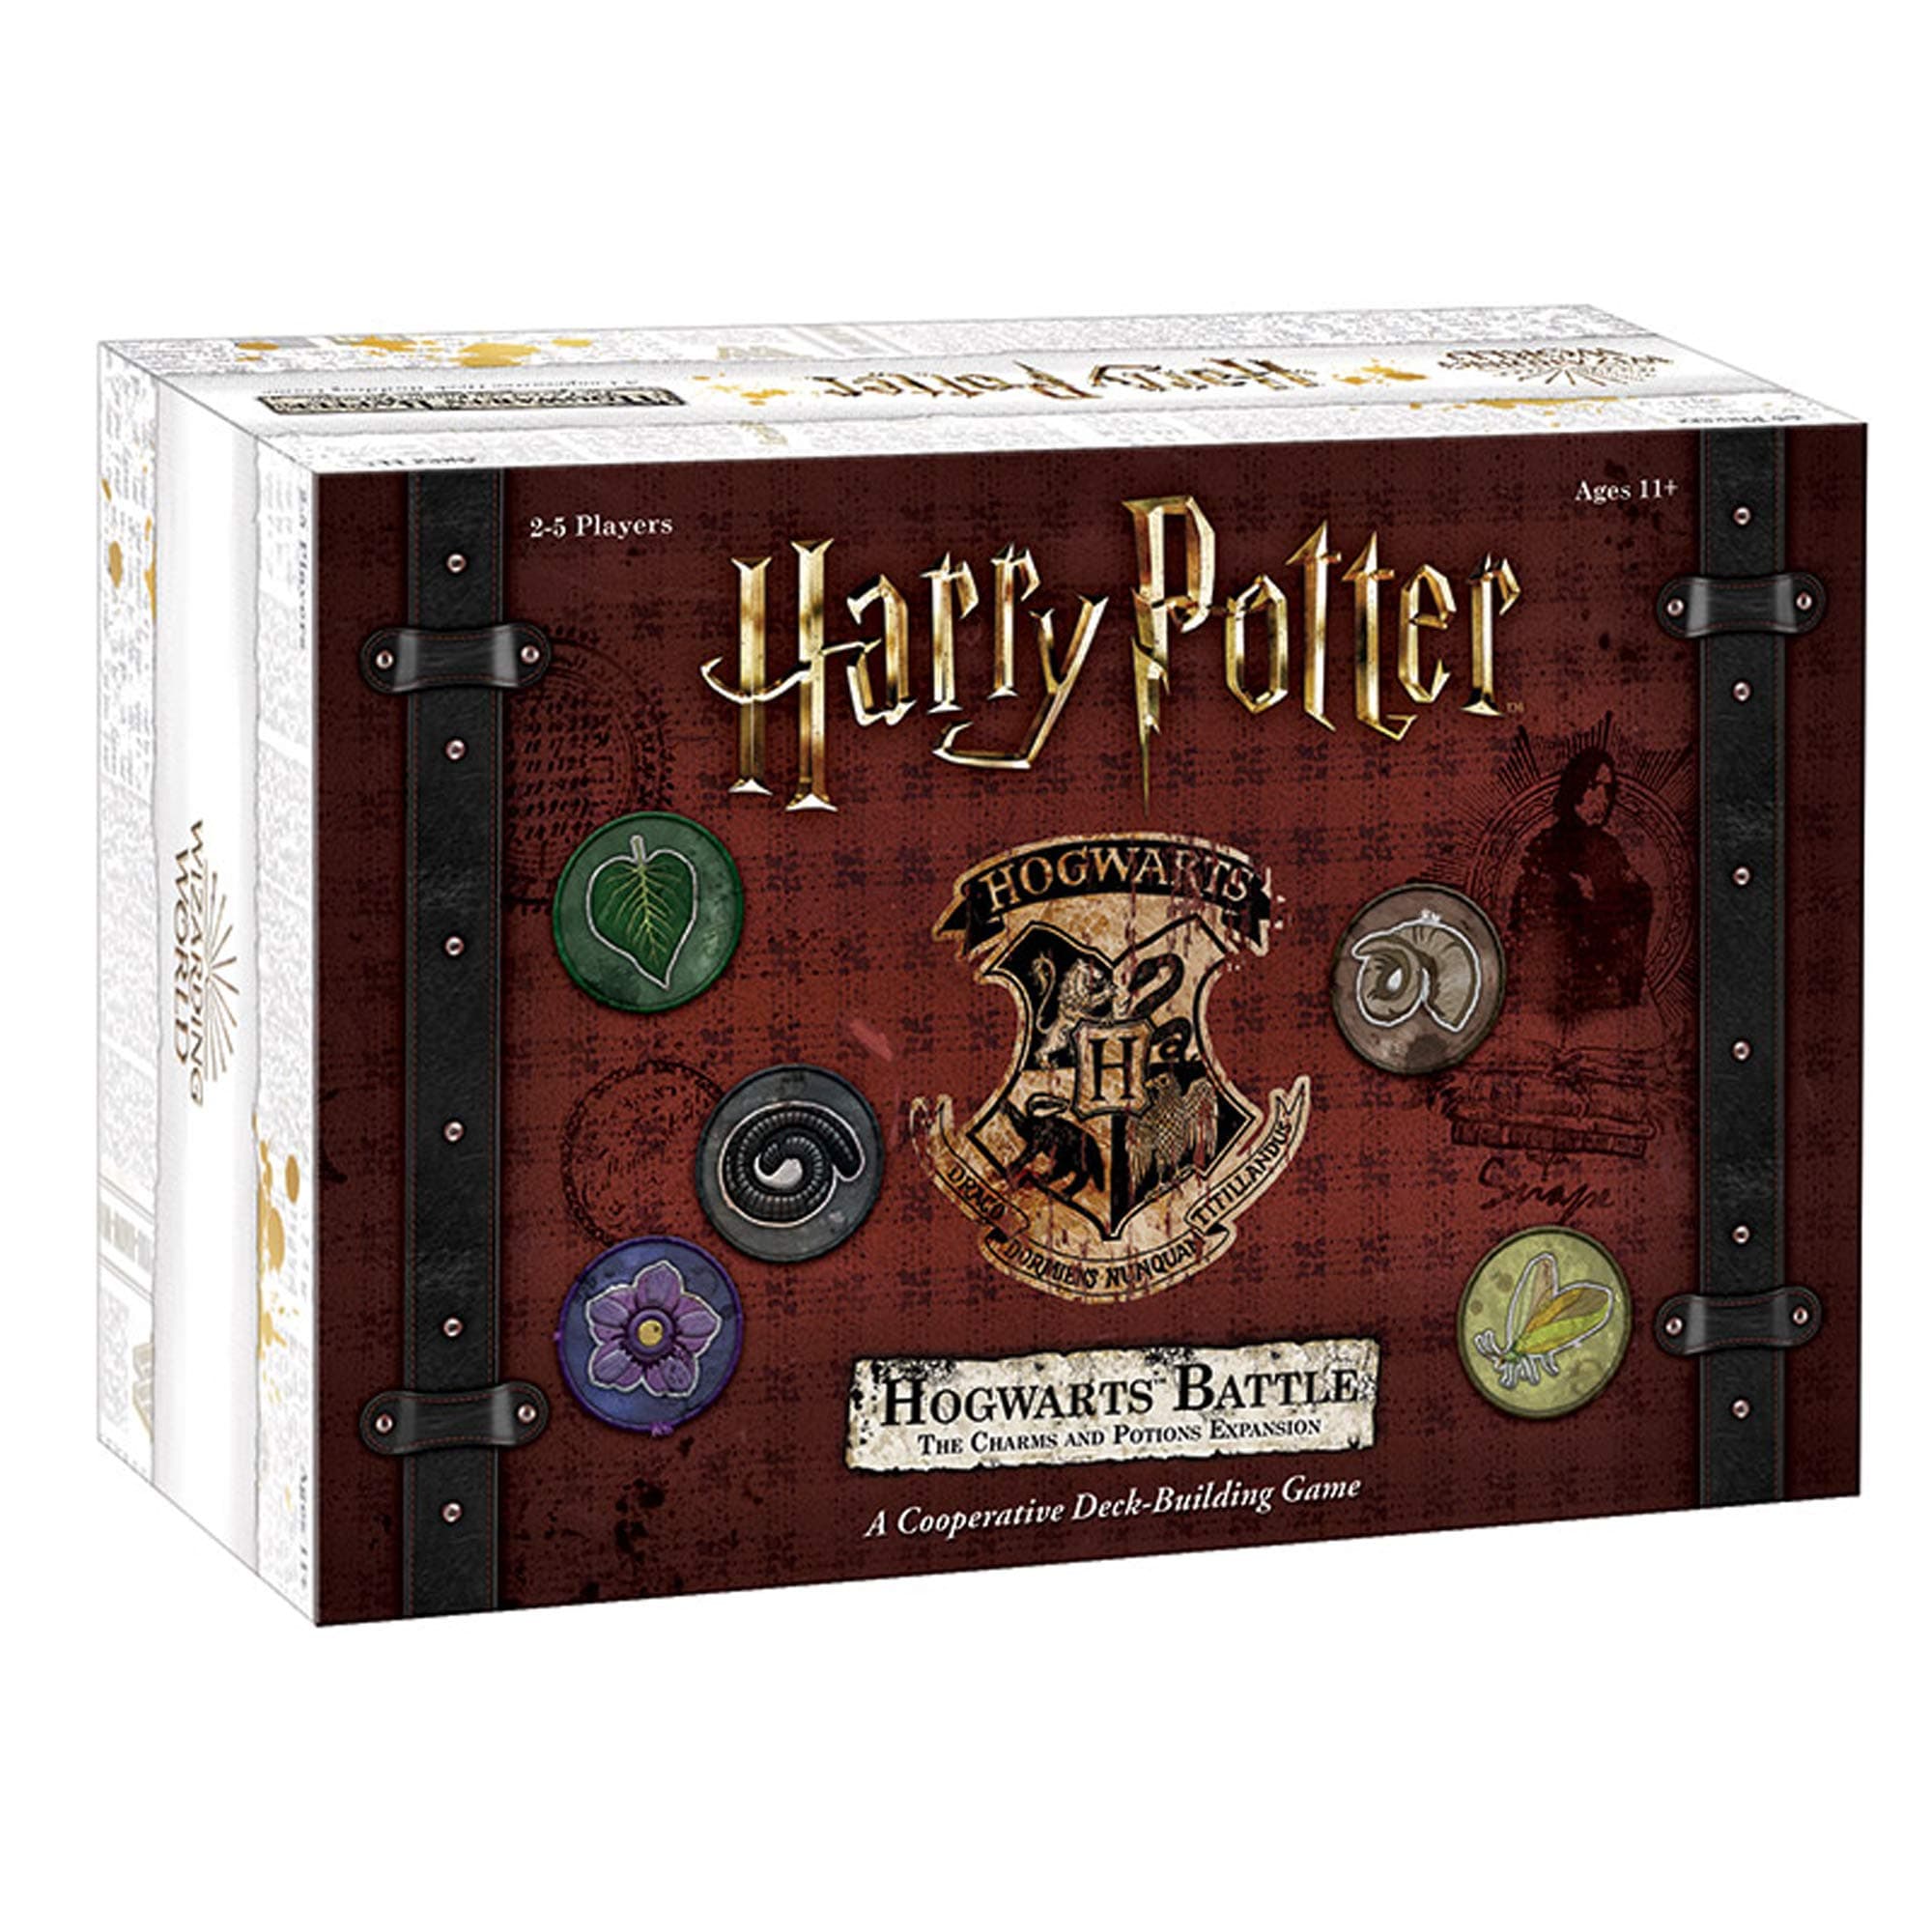 Usaopoly Deck Building Games Usaopoly Harry Potter: Hogwarts Battle DBG - The Charms and Potions Expansion